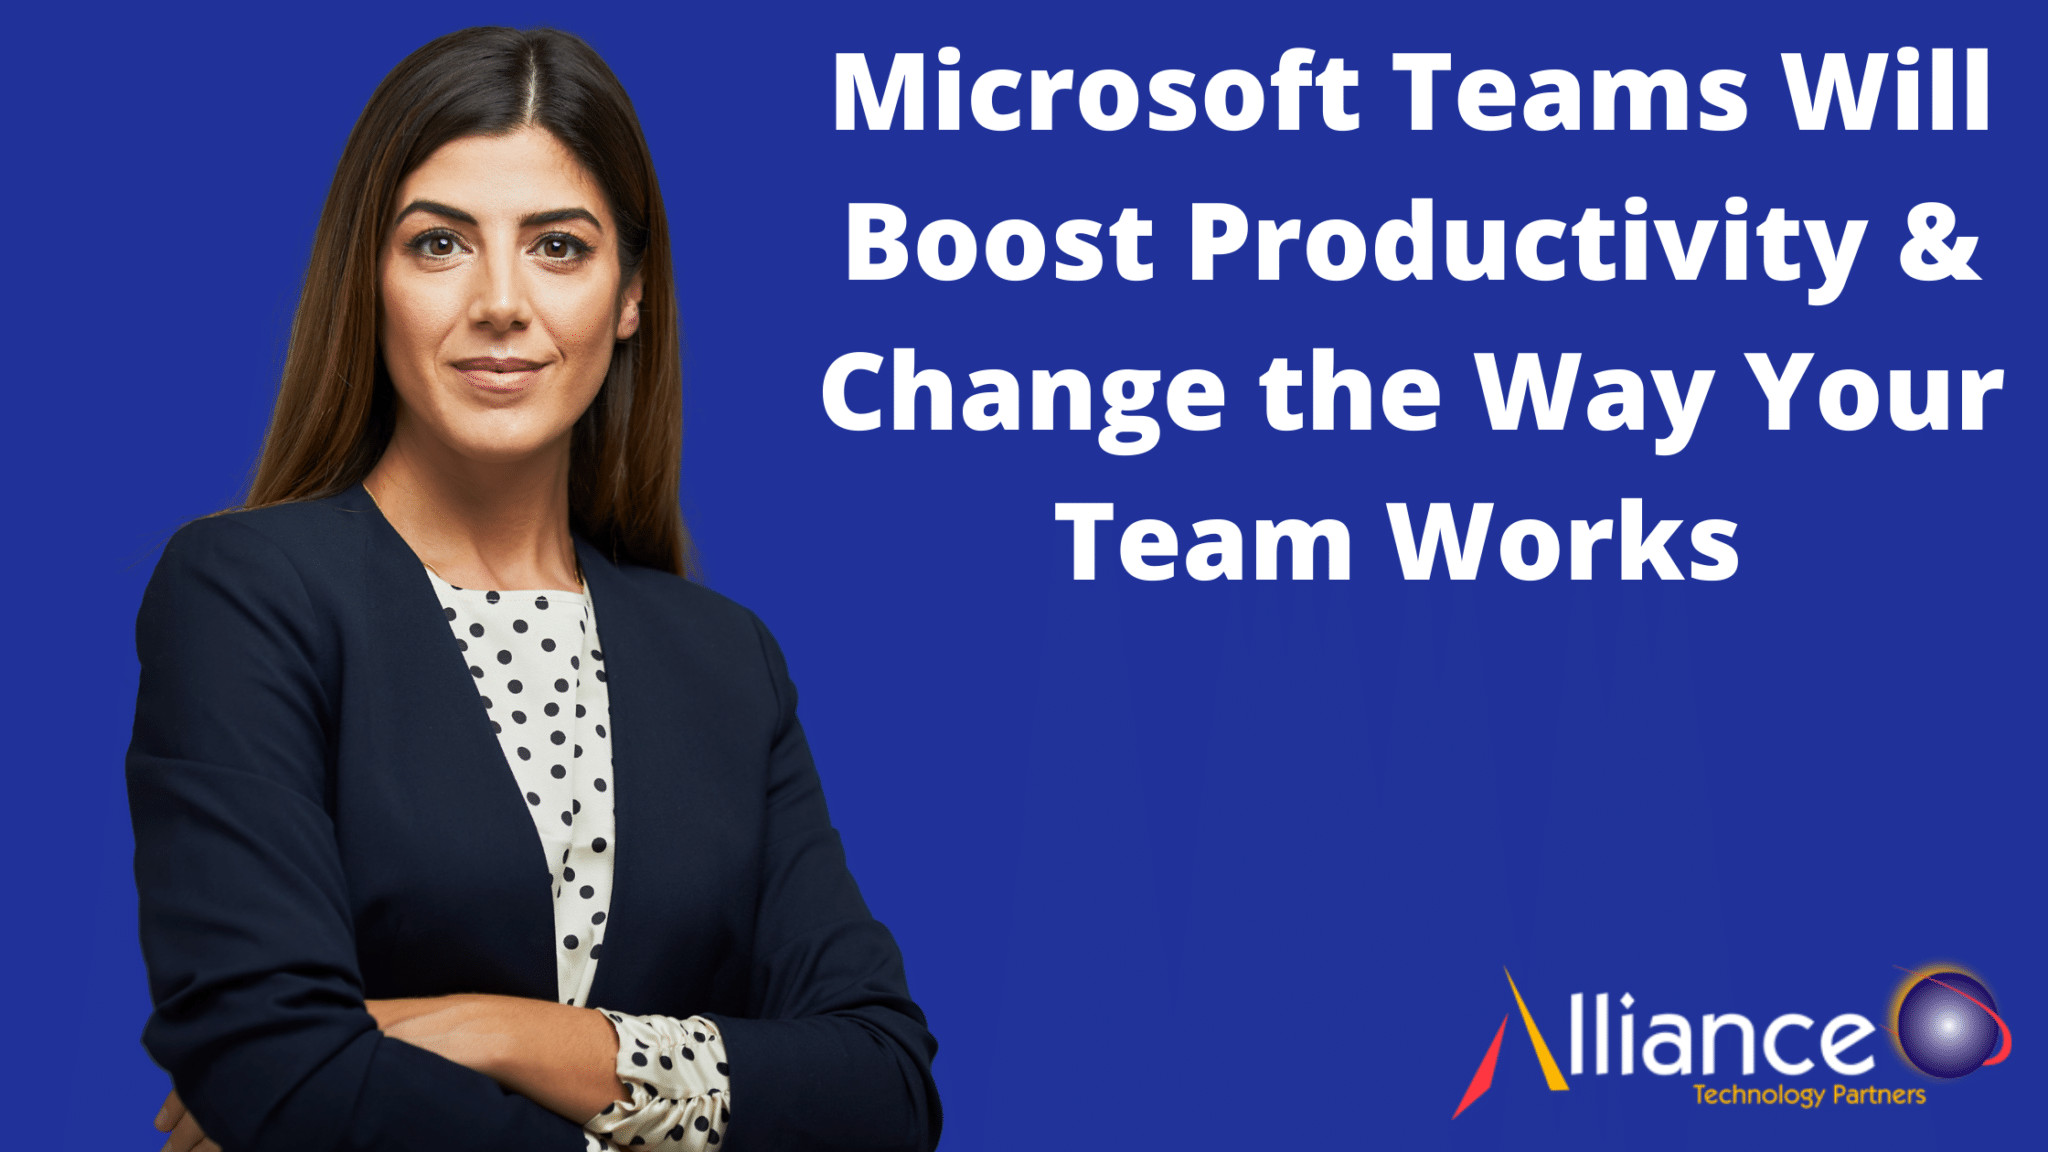 Microsoft Teams Will Boost Productivity & Change the Way Your Team Works